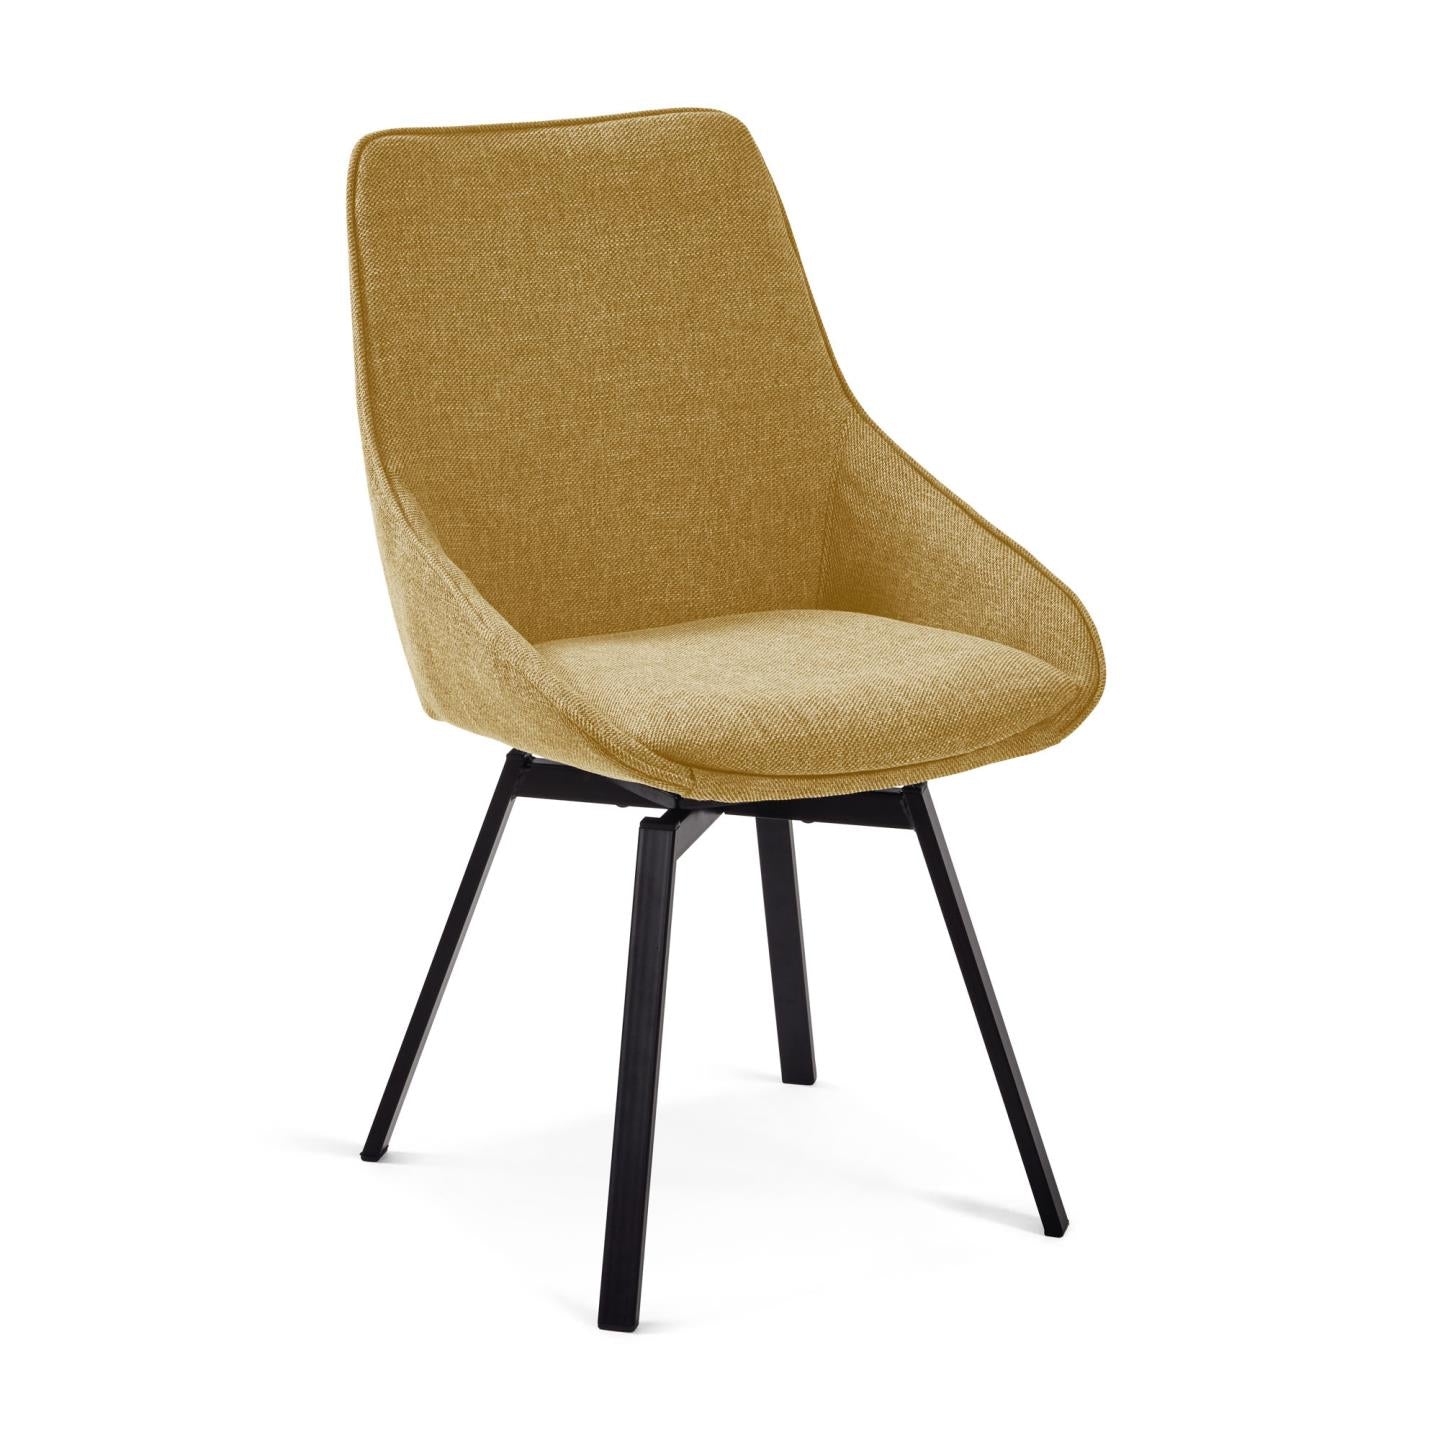 Jenna mustard swivel chair with steel legs with black finish